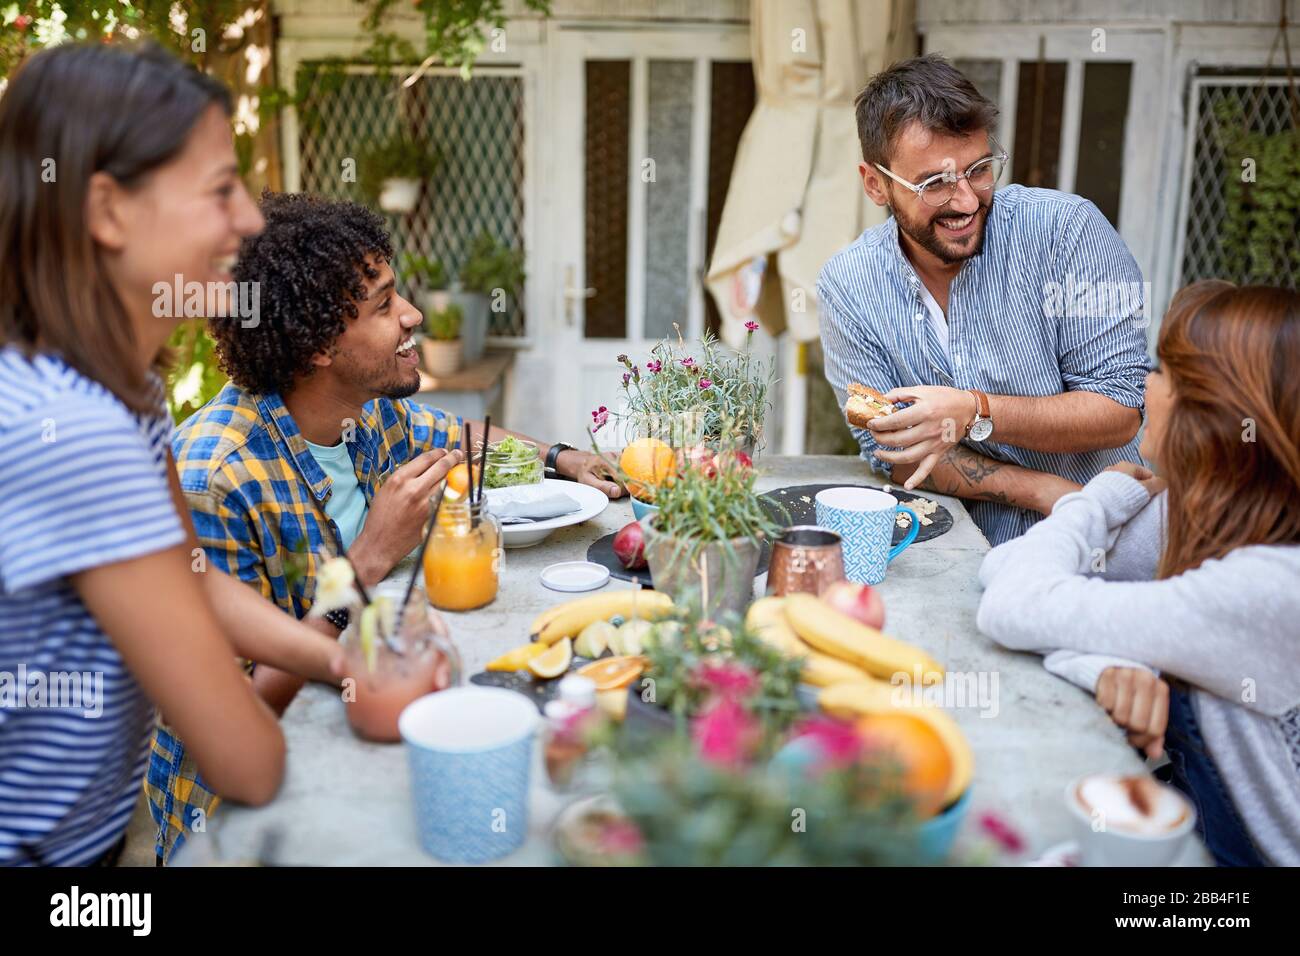 Group of young people enjoying in cafe at the table outdoor Stock Photo